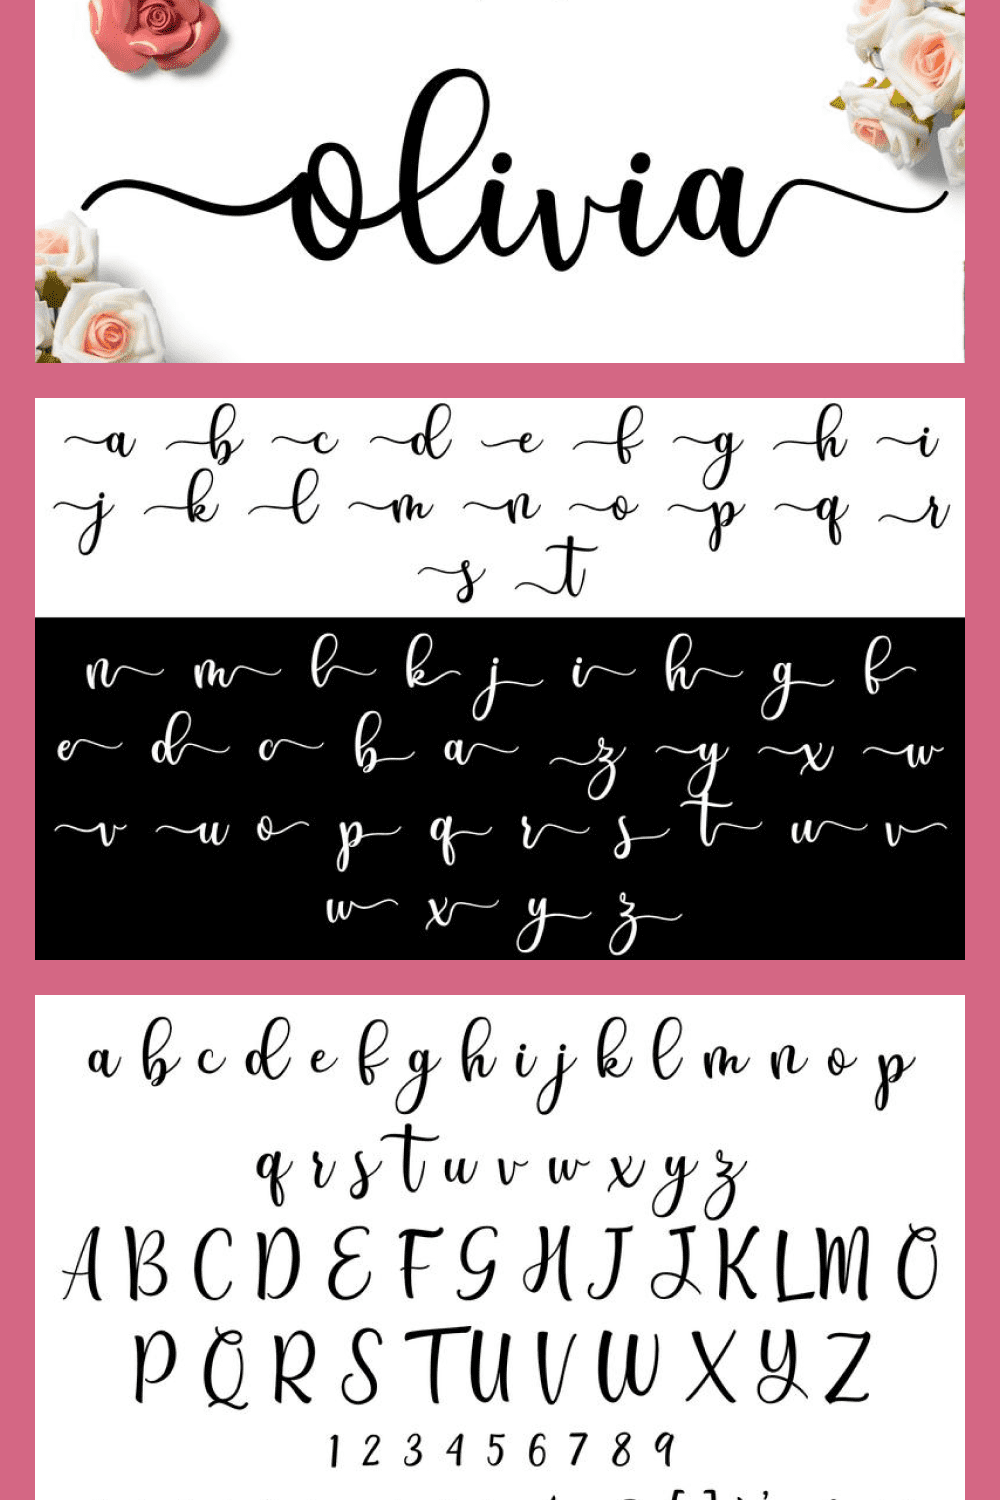 A soft and airy font for romantic confessions.